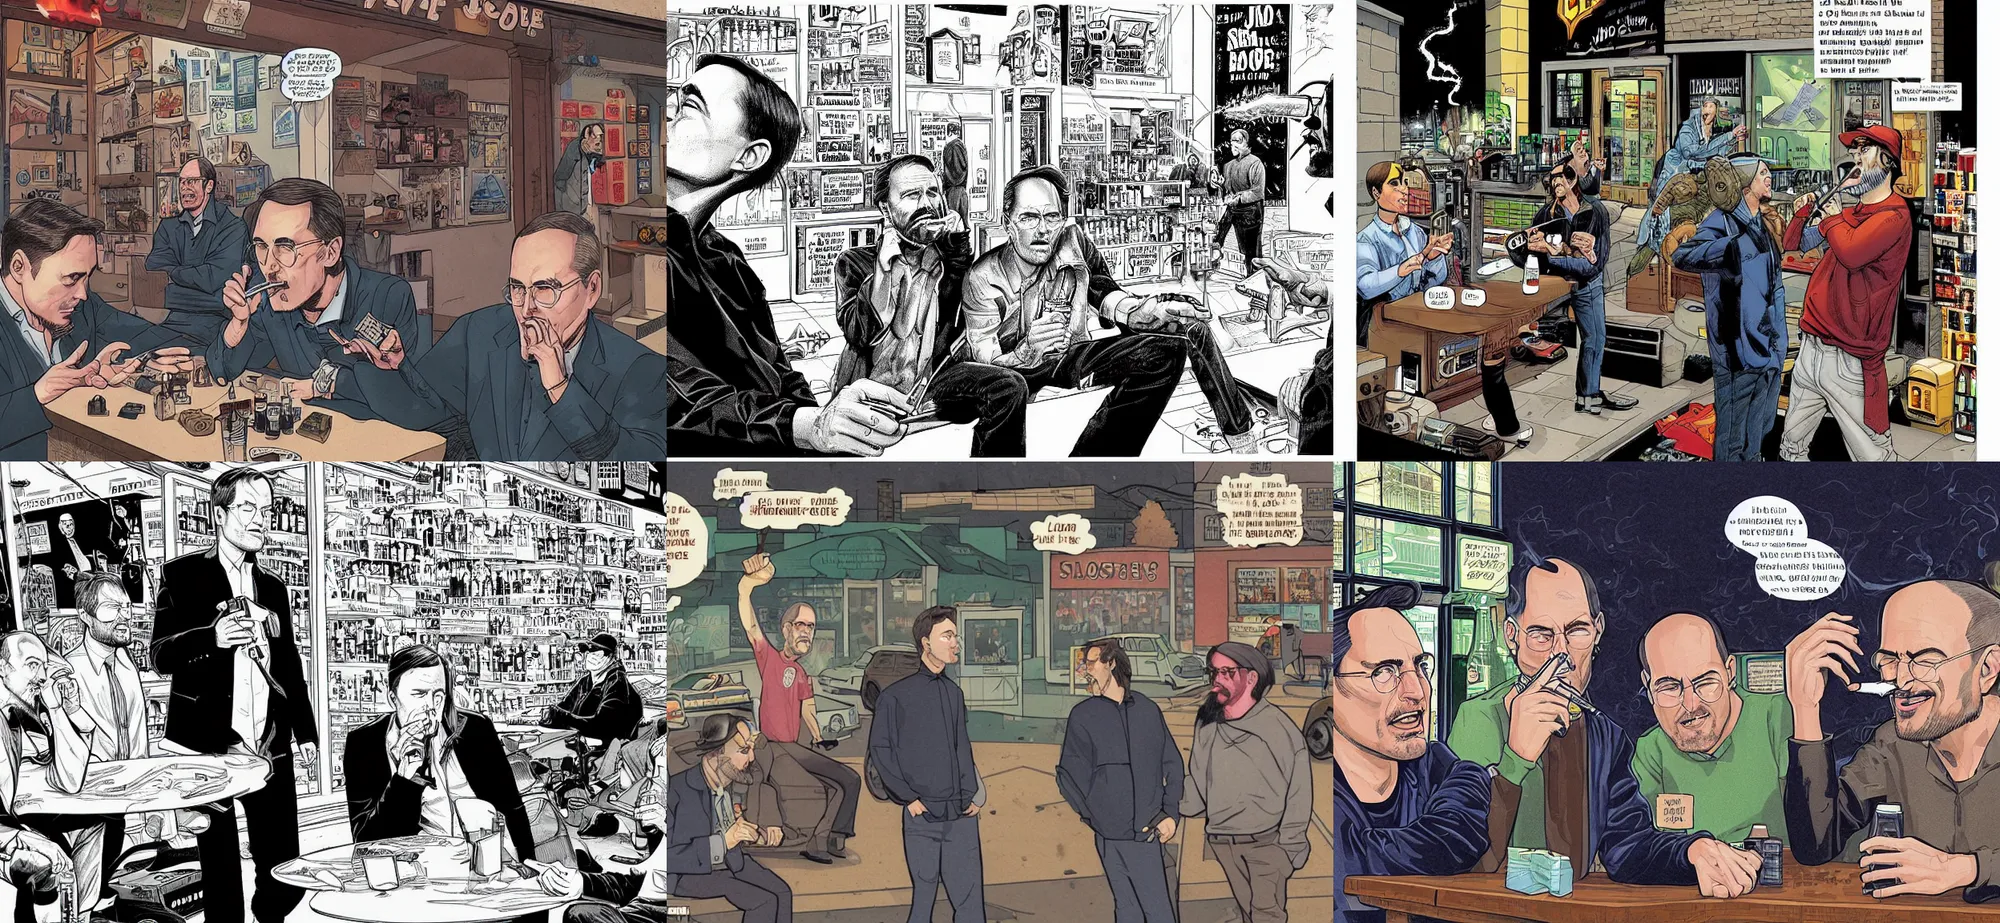 Prompt: A beautiful, stunning, extremely detailed comic book illustration by John Higgins showing Elon Musk and Steve Jobs smoking a joint with Jay and Silent Bob behind a liquor store, smoke in the air, Steve Jobs coughing